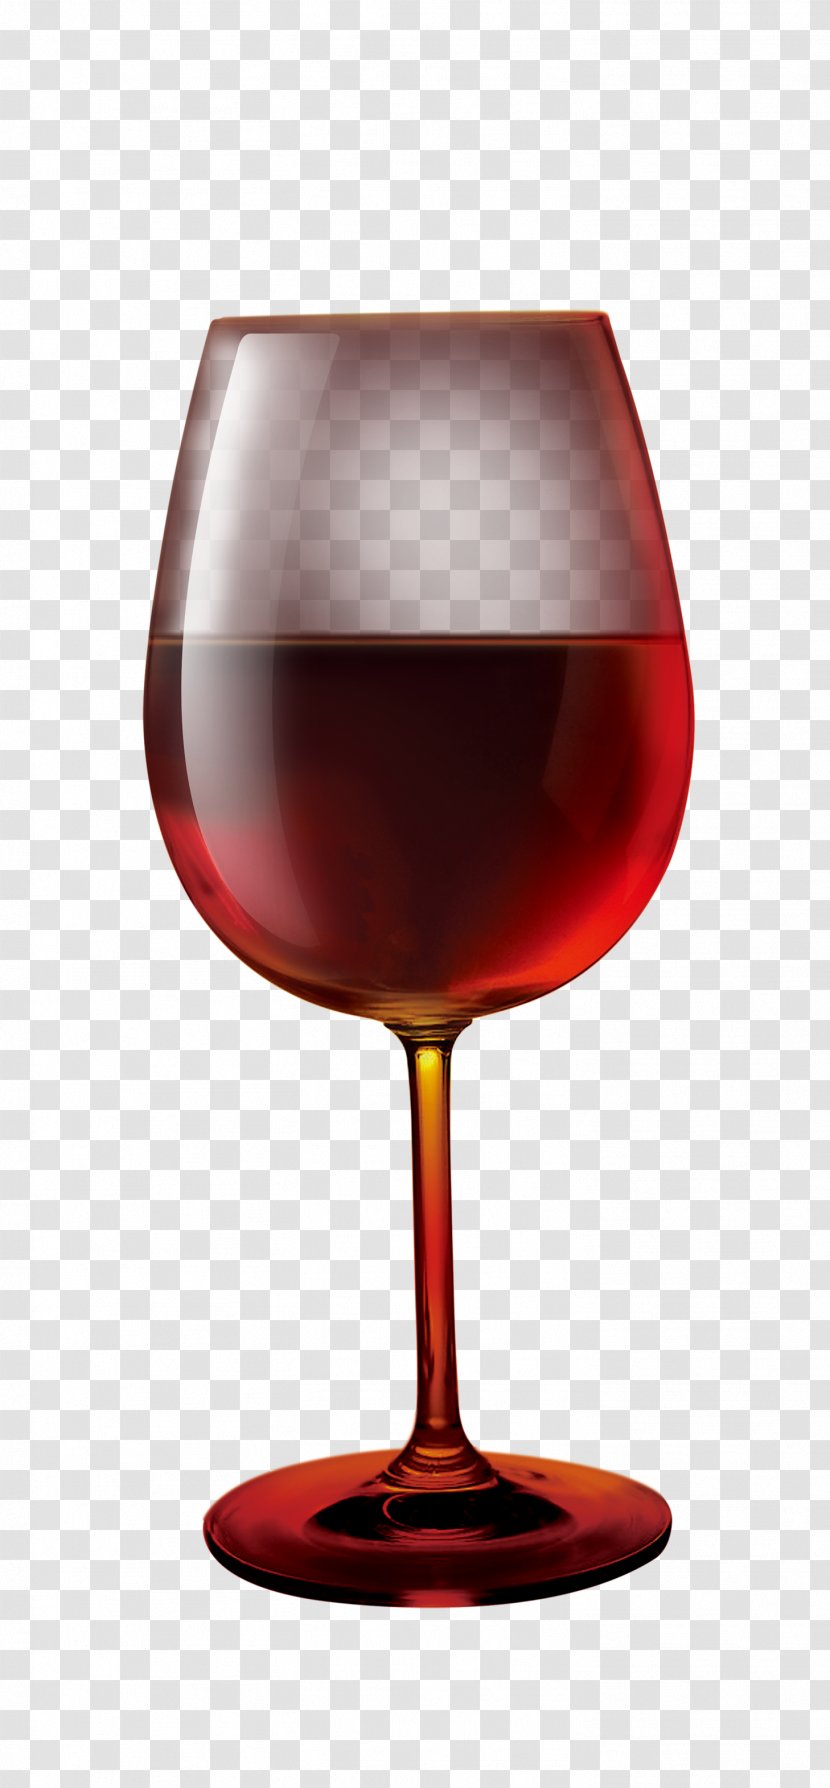 Red Wine Glass Cocktail - Drink - Decorative Pattern Transparent PNG